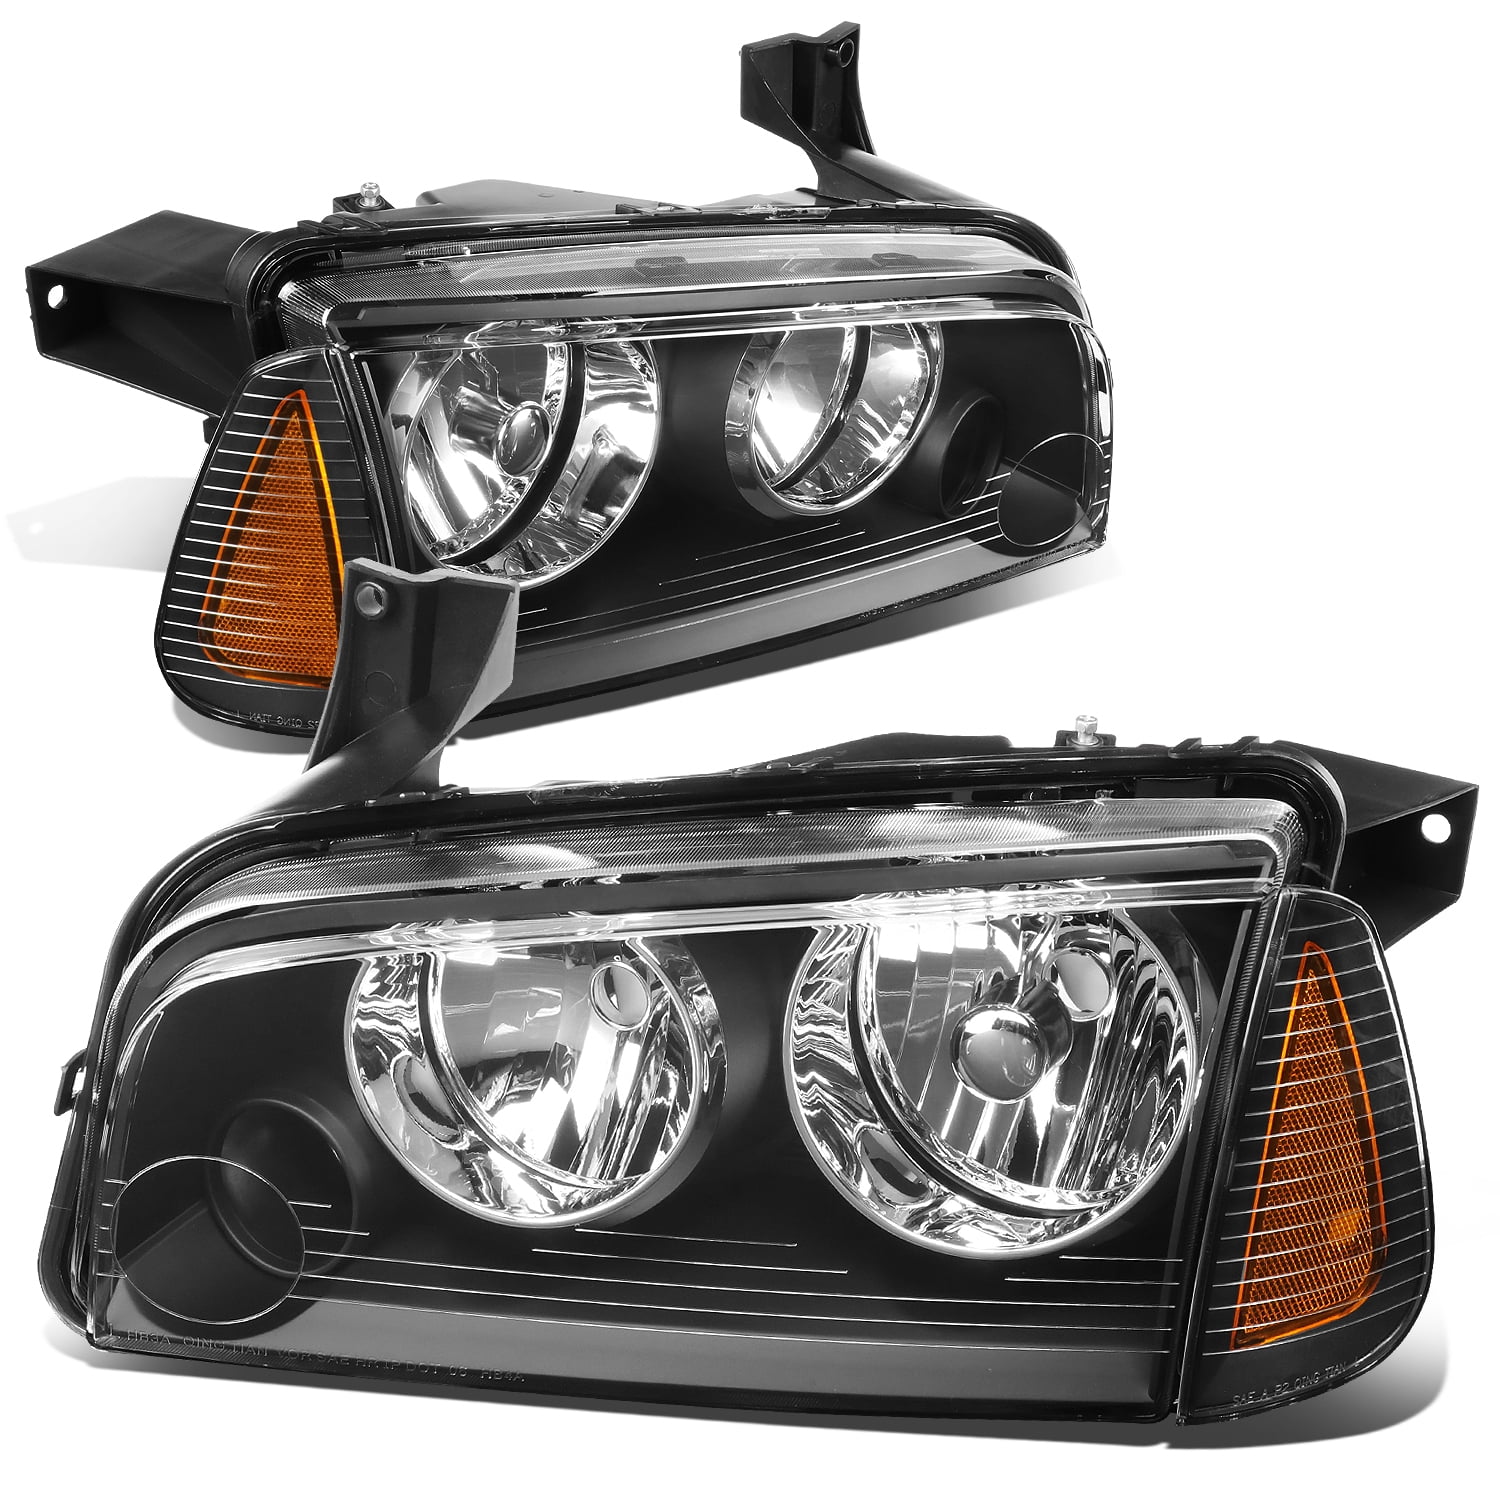 Raeplacement Left and Right Amber Corner Signal Lights For 2006-2010 Dodge Charger Black Headlights 